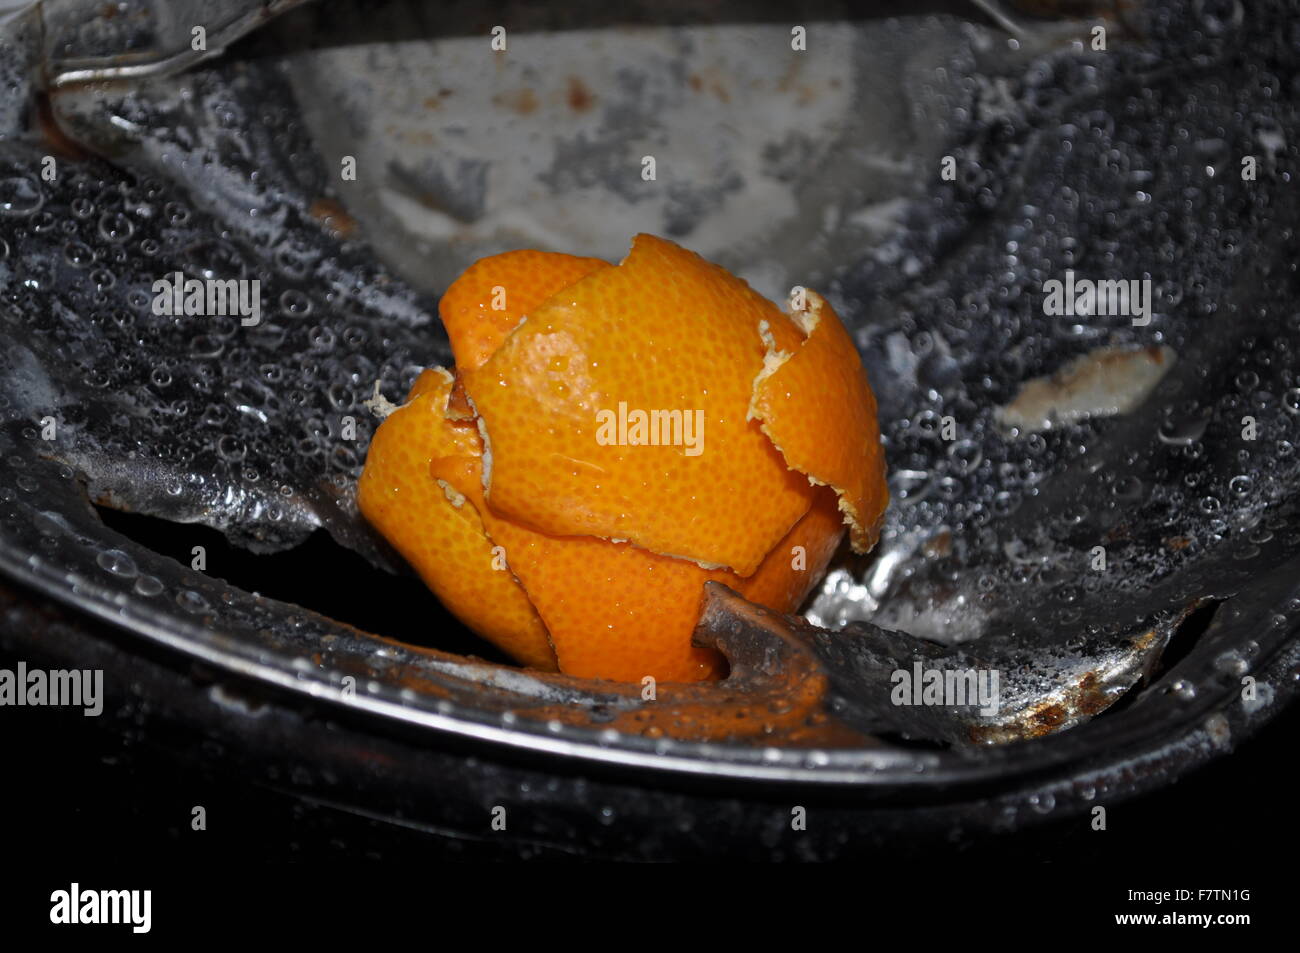 A close up of orange peel laying on a wet oil drum Stock Photo